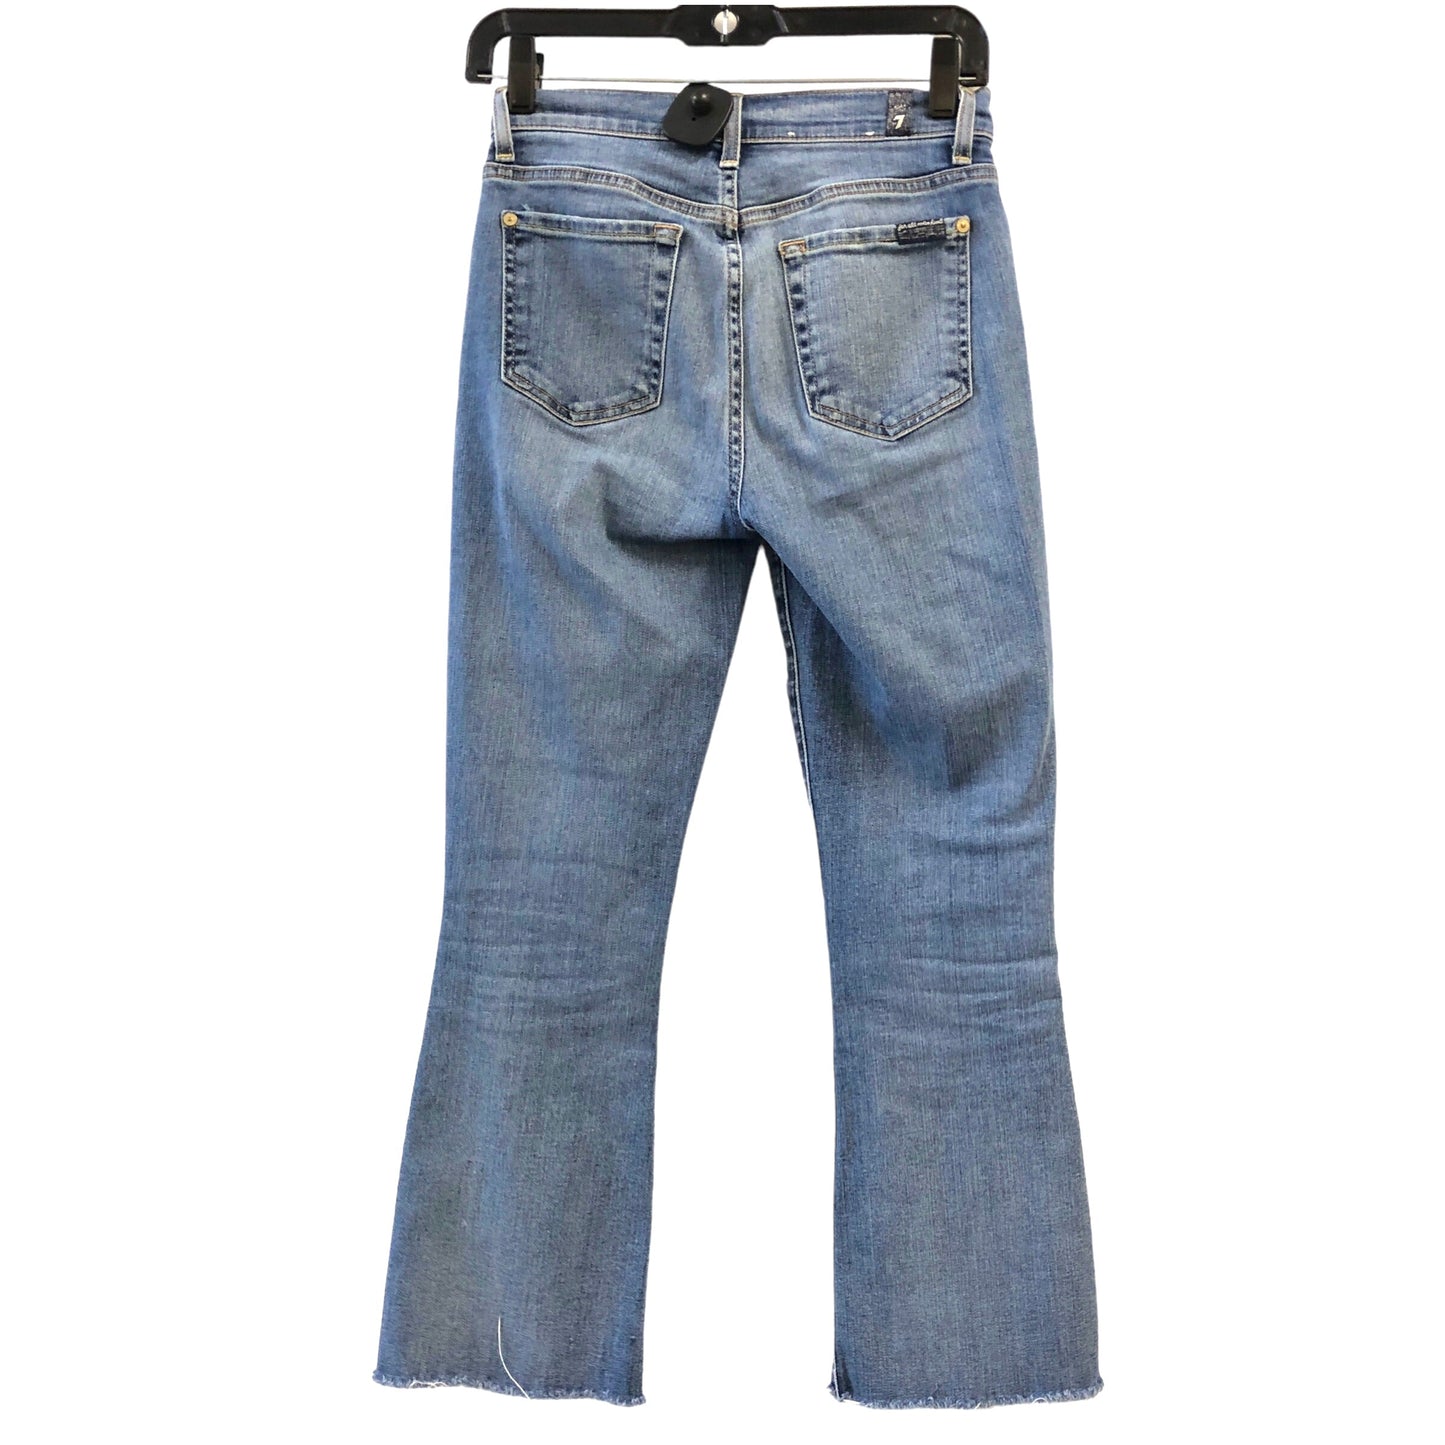 Jeans Cropped By 7 For All Mankind  Size: 0